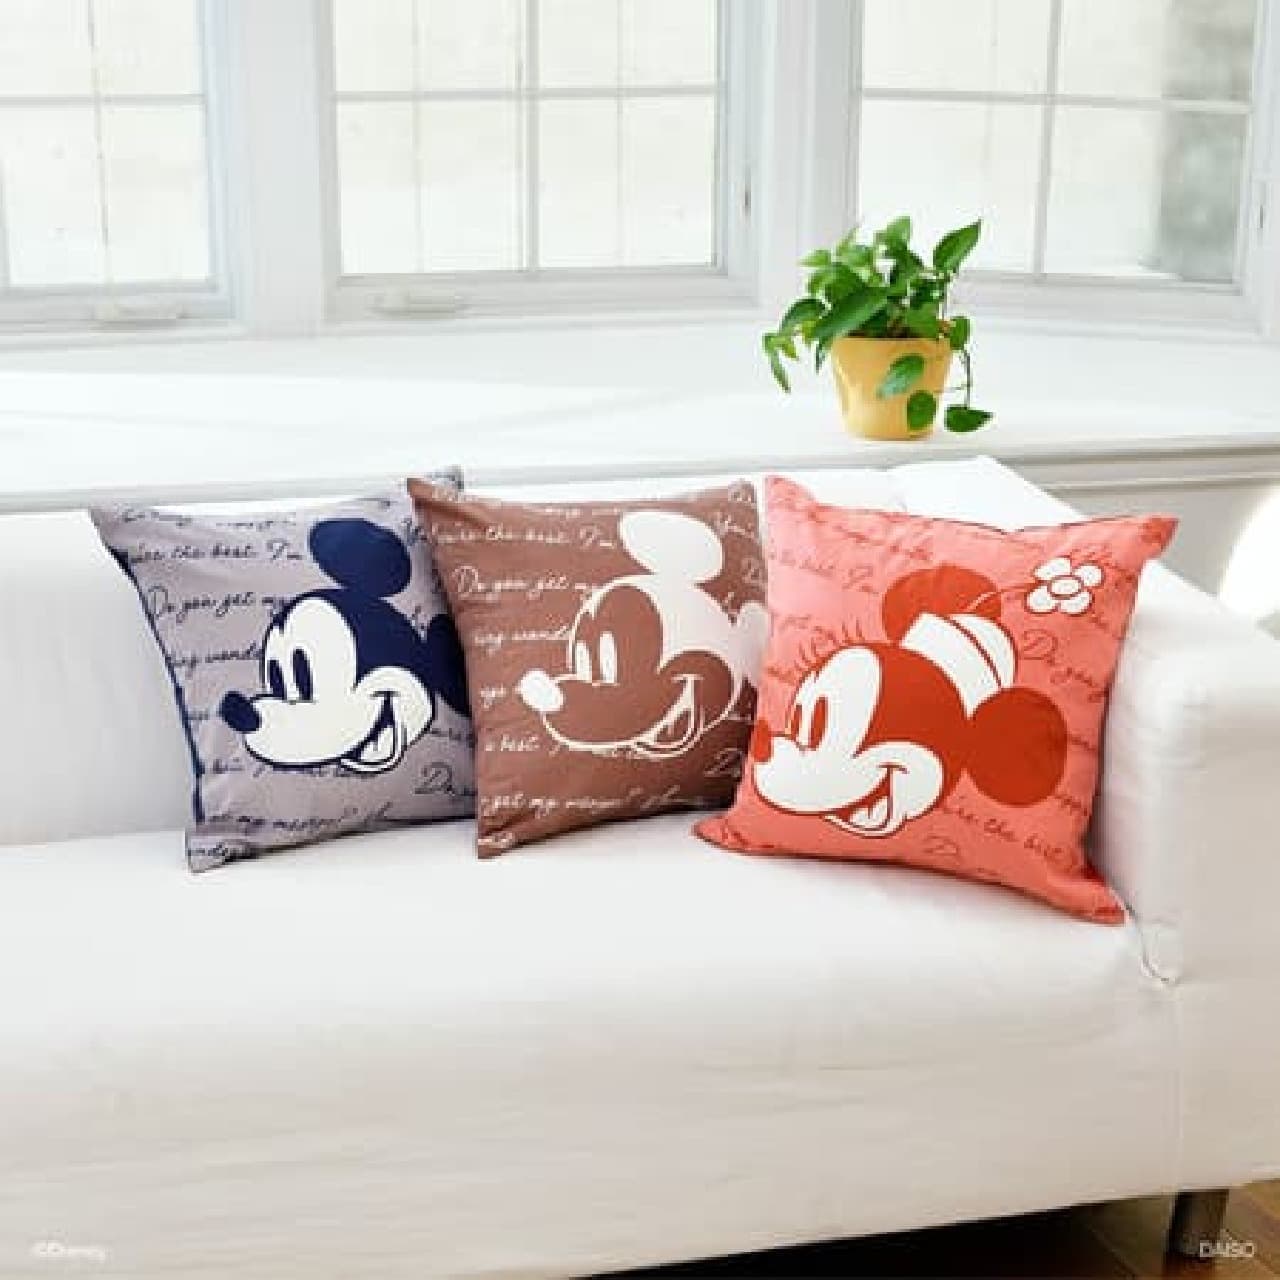 Daiso Disney Design Collection Vol. 4 -- Mickey & Minnie Cute Gadgets! THREEPPY Toy Story Series too!